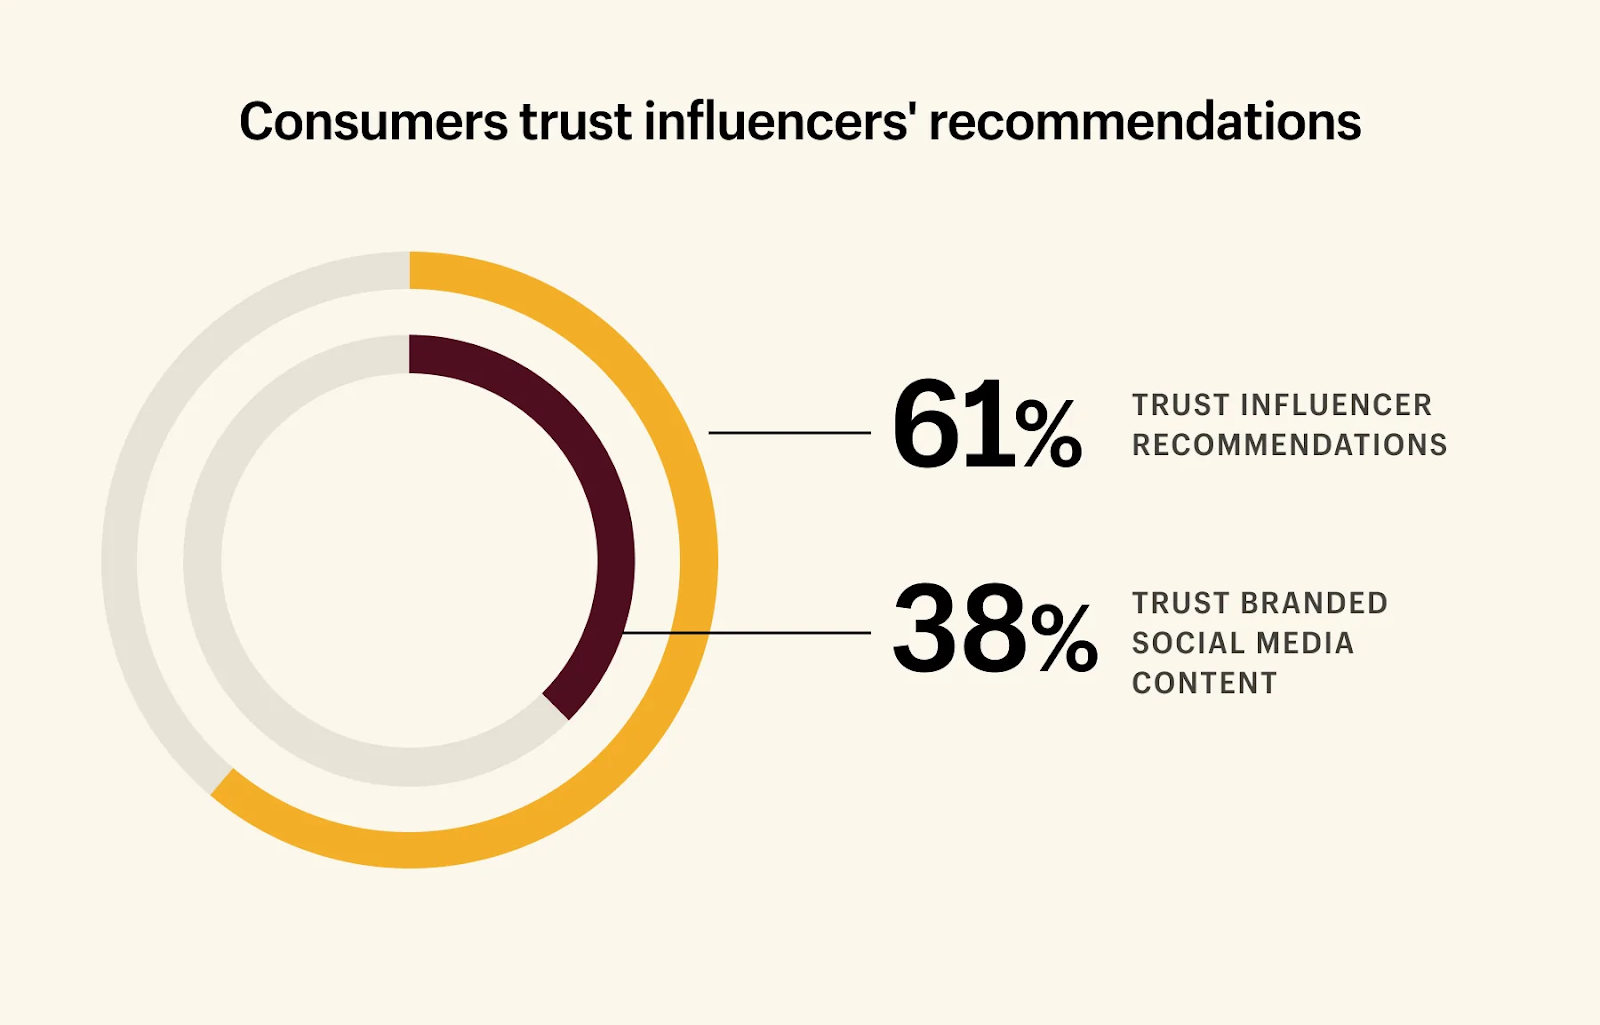 More than half of customers surveyed agree that influencers help them draw buying decision.